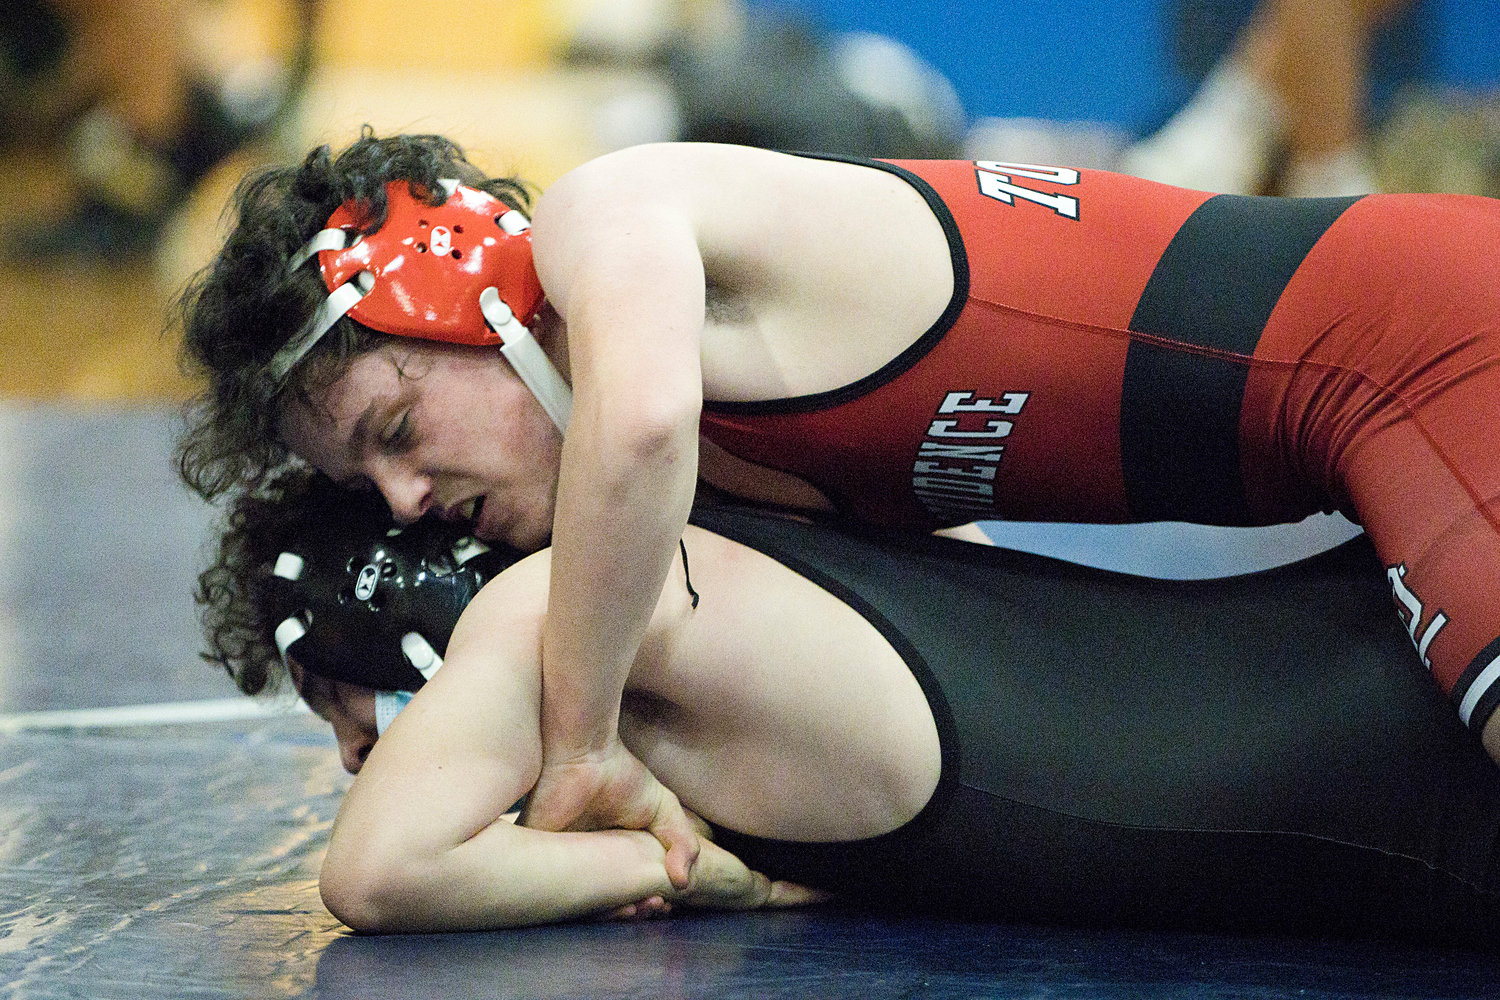 East Providence High School’s Louis Pacheco Jr. controls his opponent while competing against Hendricken in the 132lb. weight class at Barrington earlier this season.